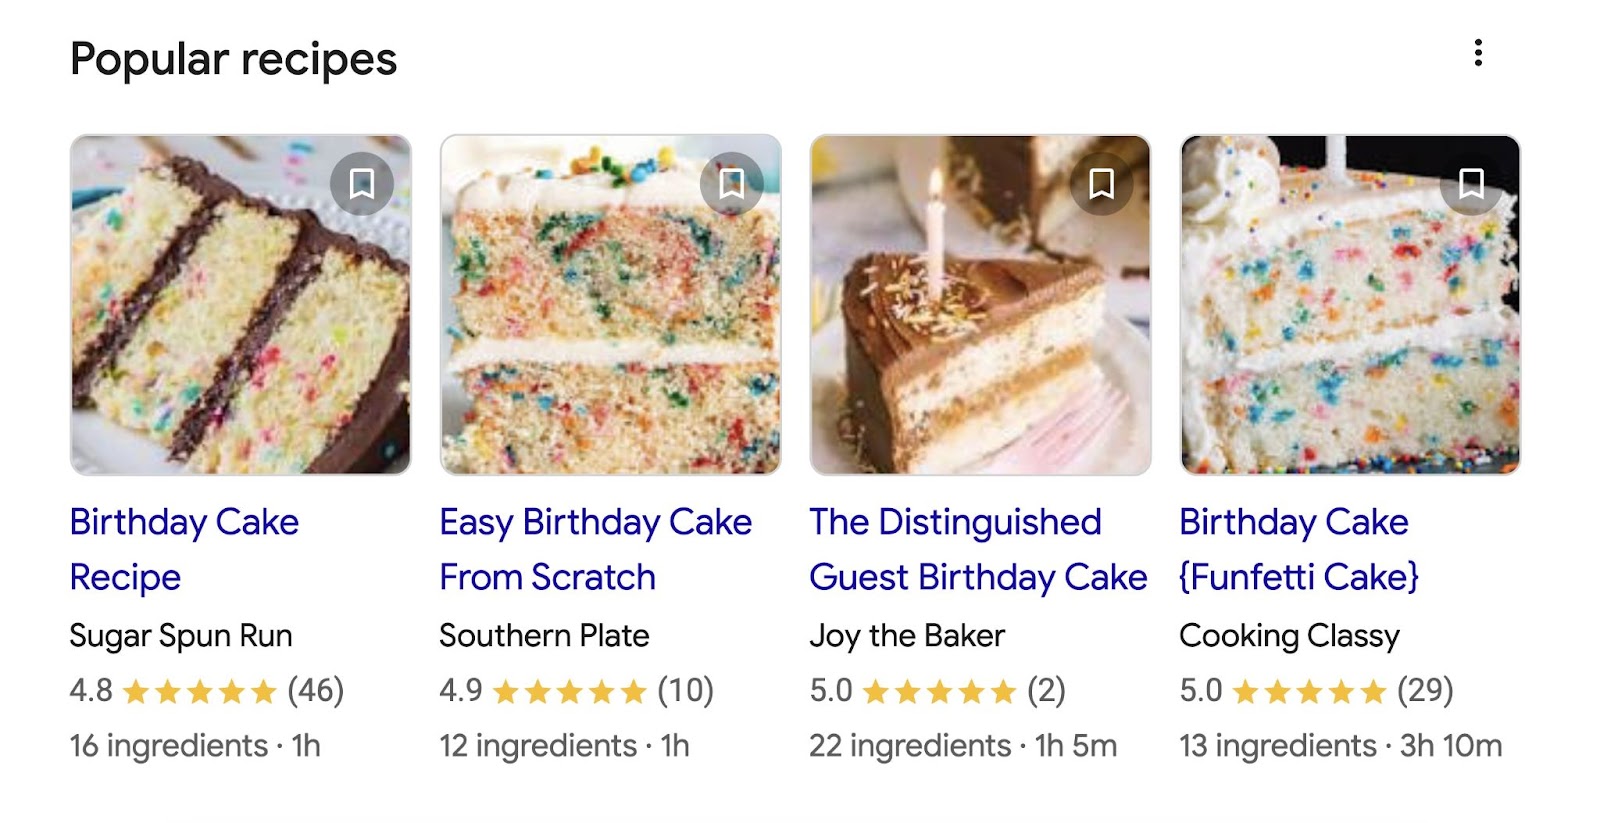 popular recipes pack shows 4 recipes near the top of the serp